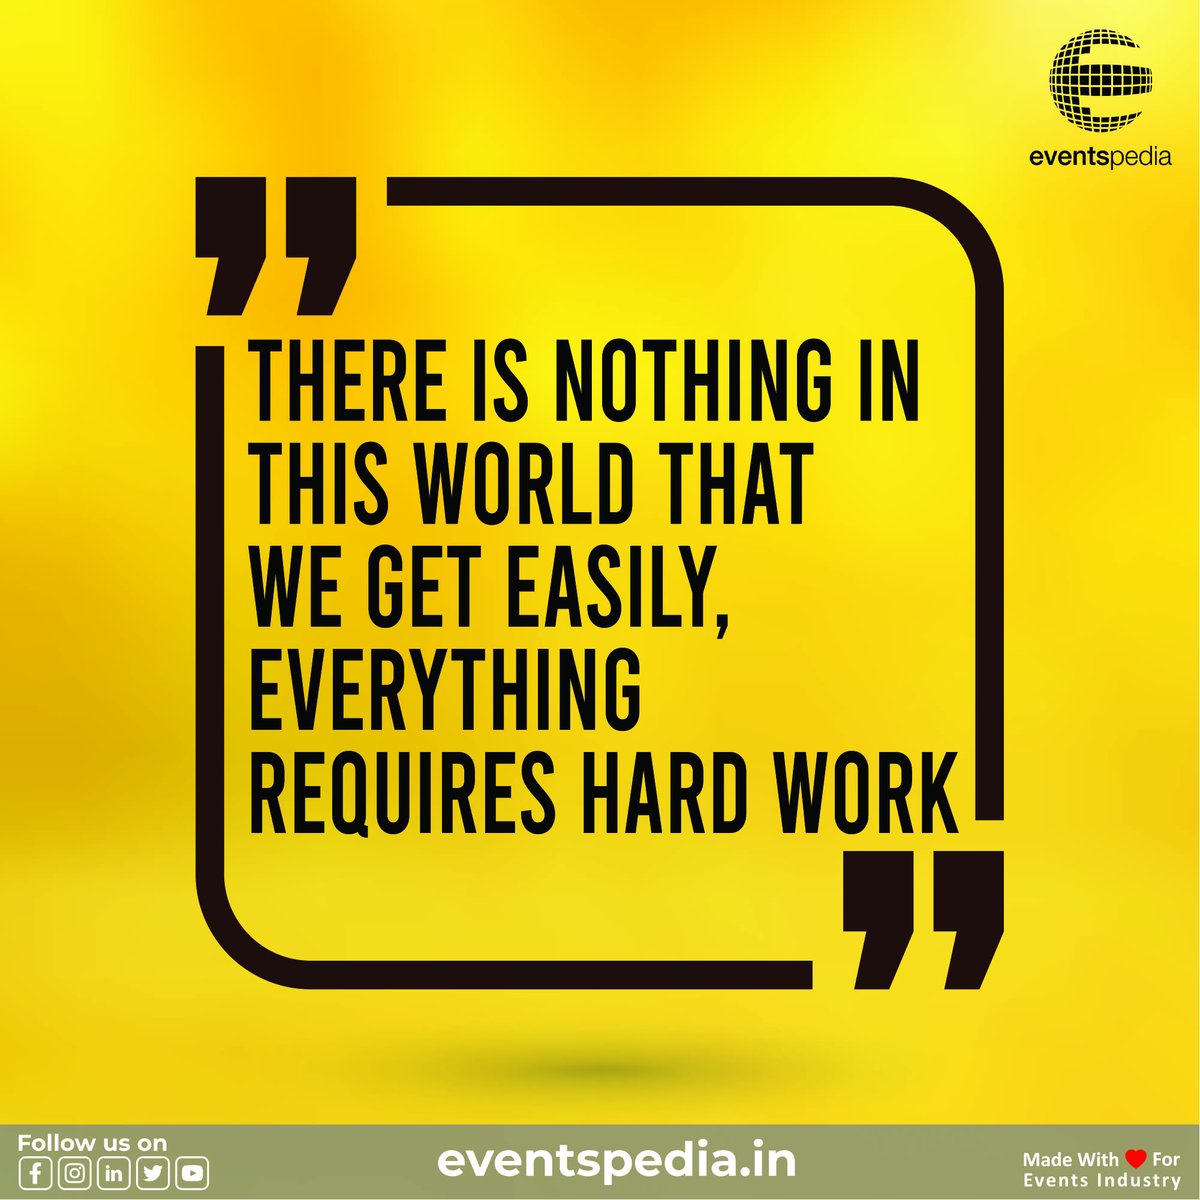 'There Is Nothing In This World That We Get EASILY, Everything Requires HARD WORK'.

Visit us at: eventspedia.in
Connect with us at: support@eventspedia.in

#easily #hardwork #reuqires #eventslife #eventsprofs #eventplanner #eventtrends #eventspediaindia #events